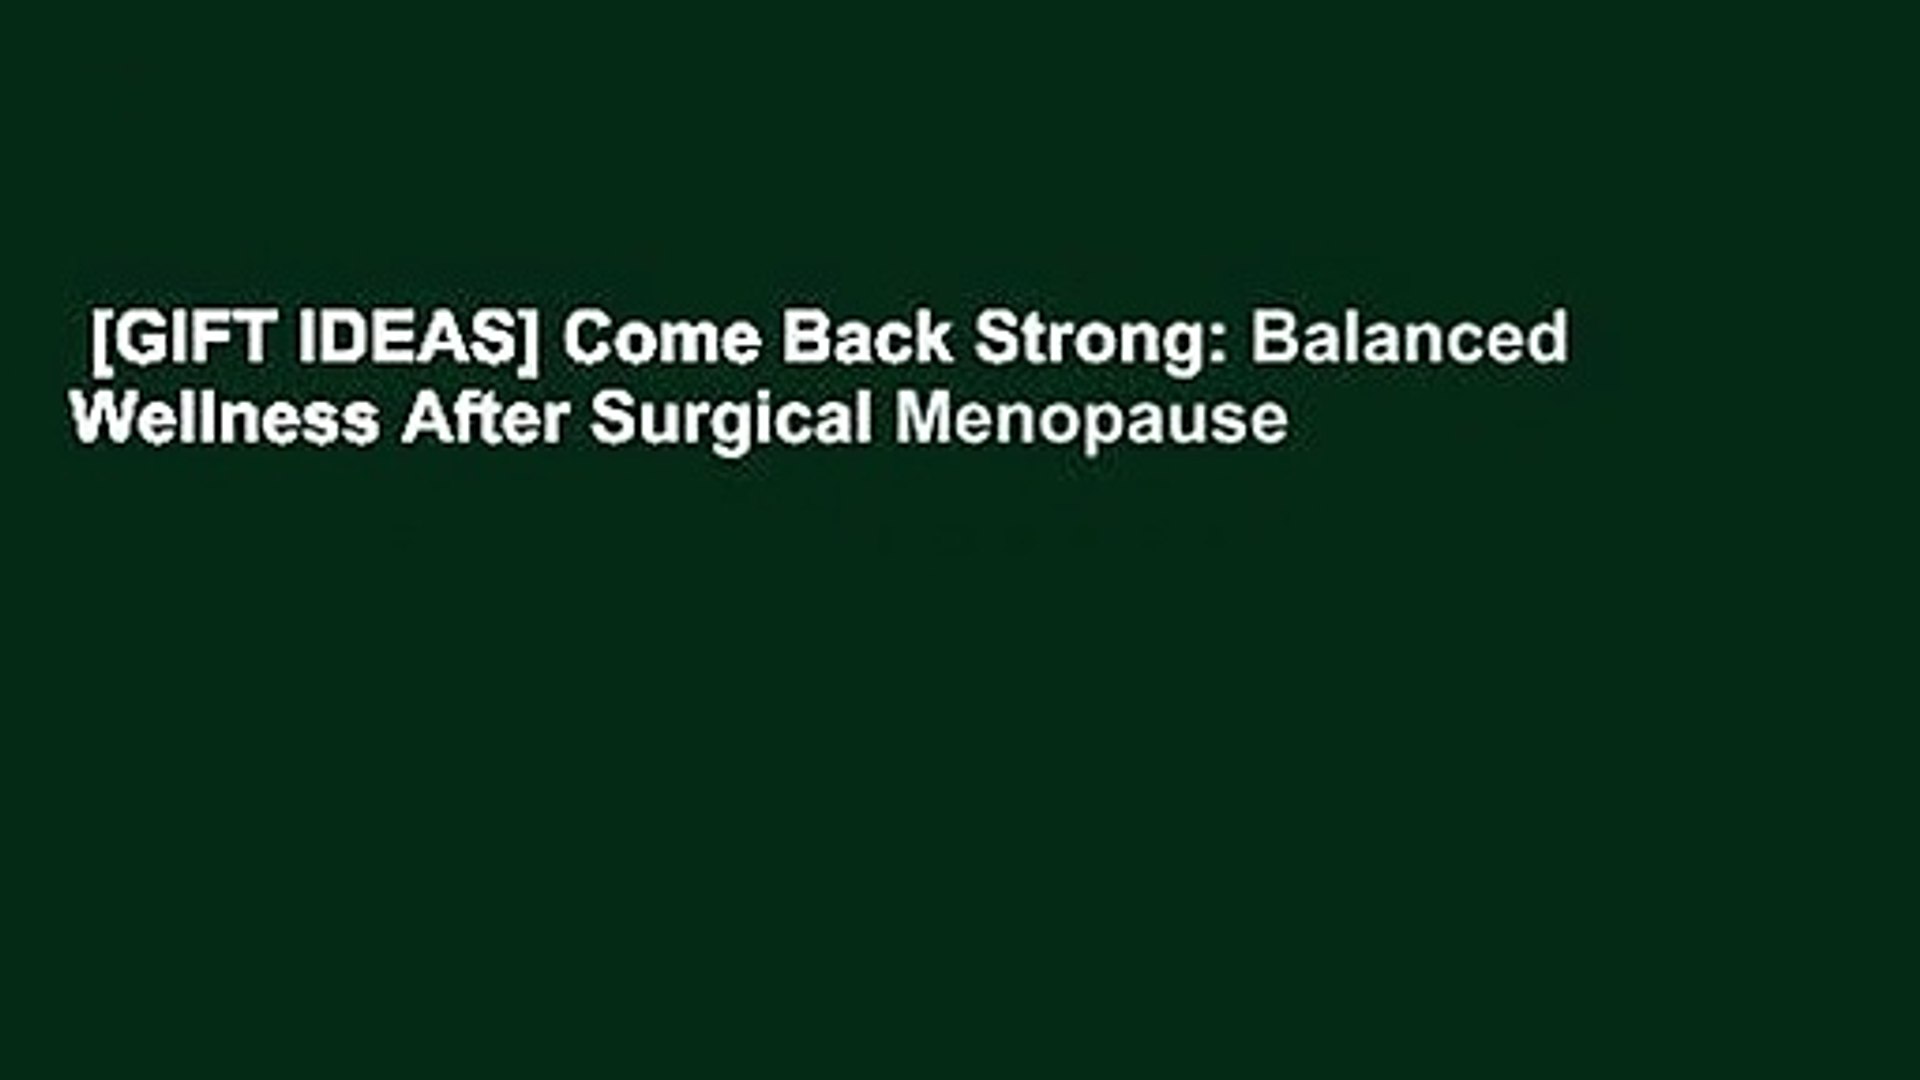 Balanced Wellness after Surgical Menopause Come Back Strong